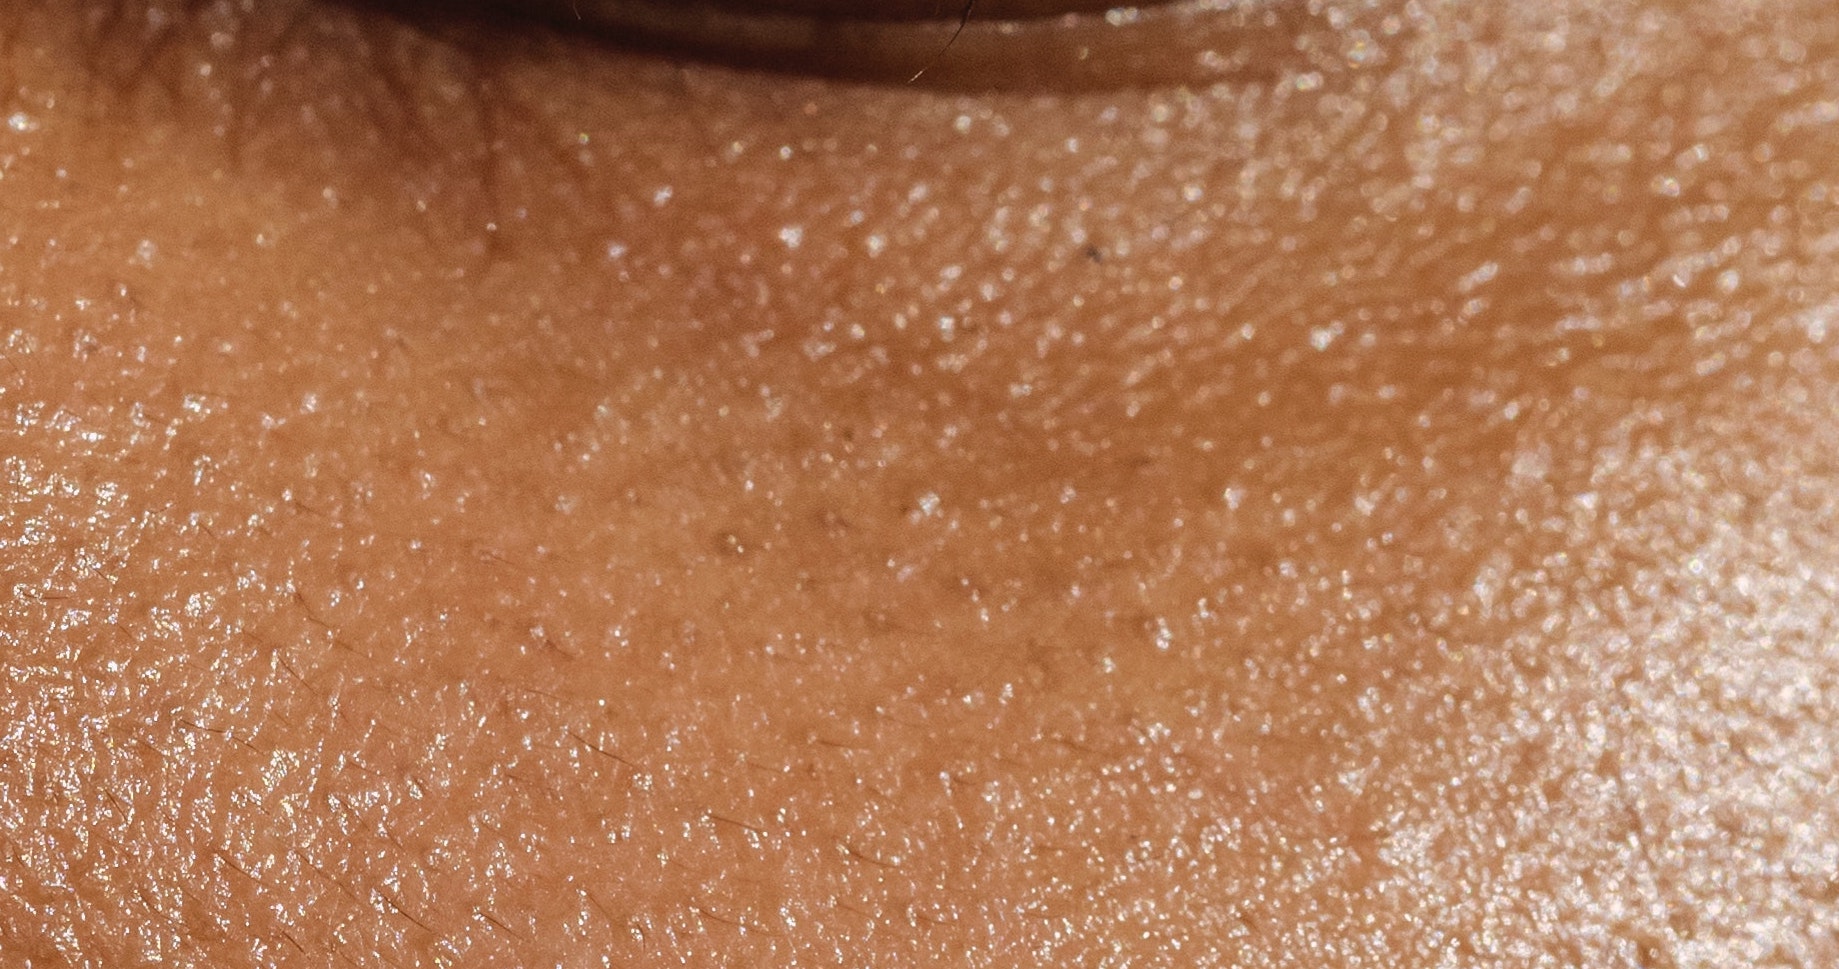 What Affects Pore Size?